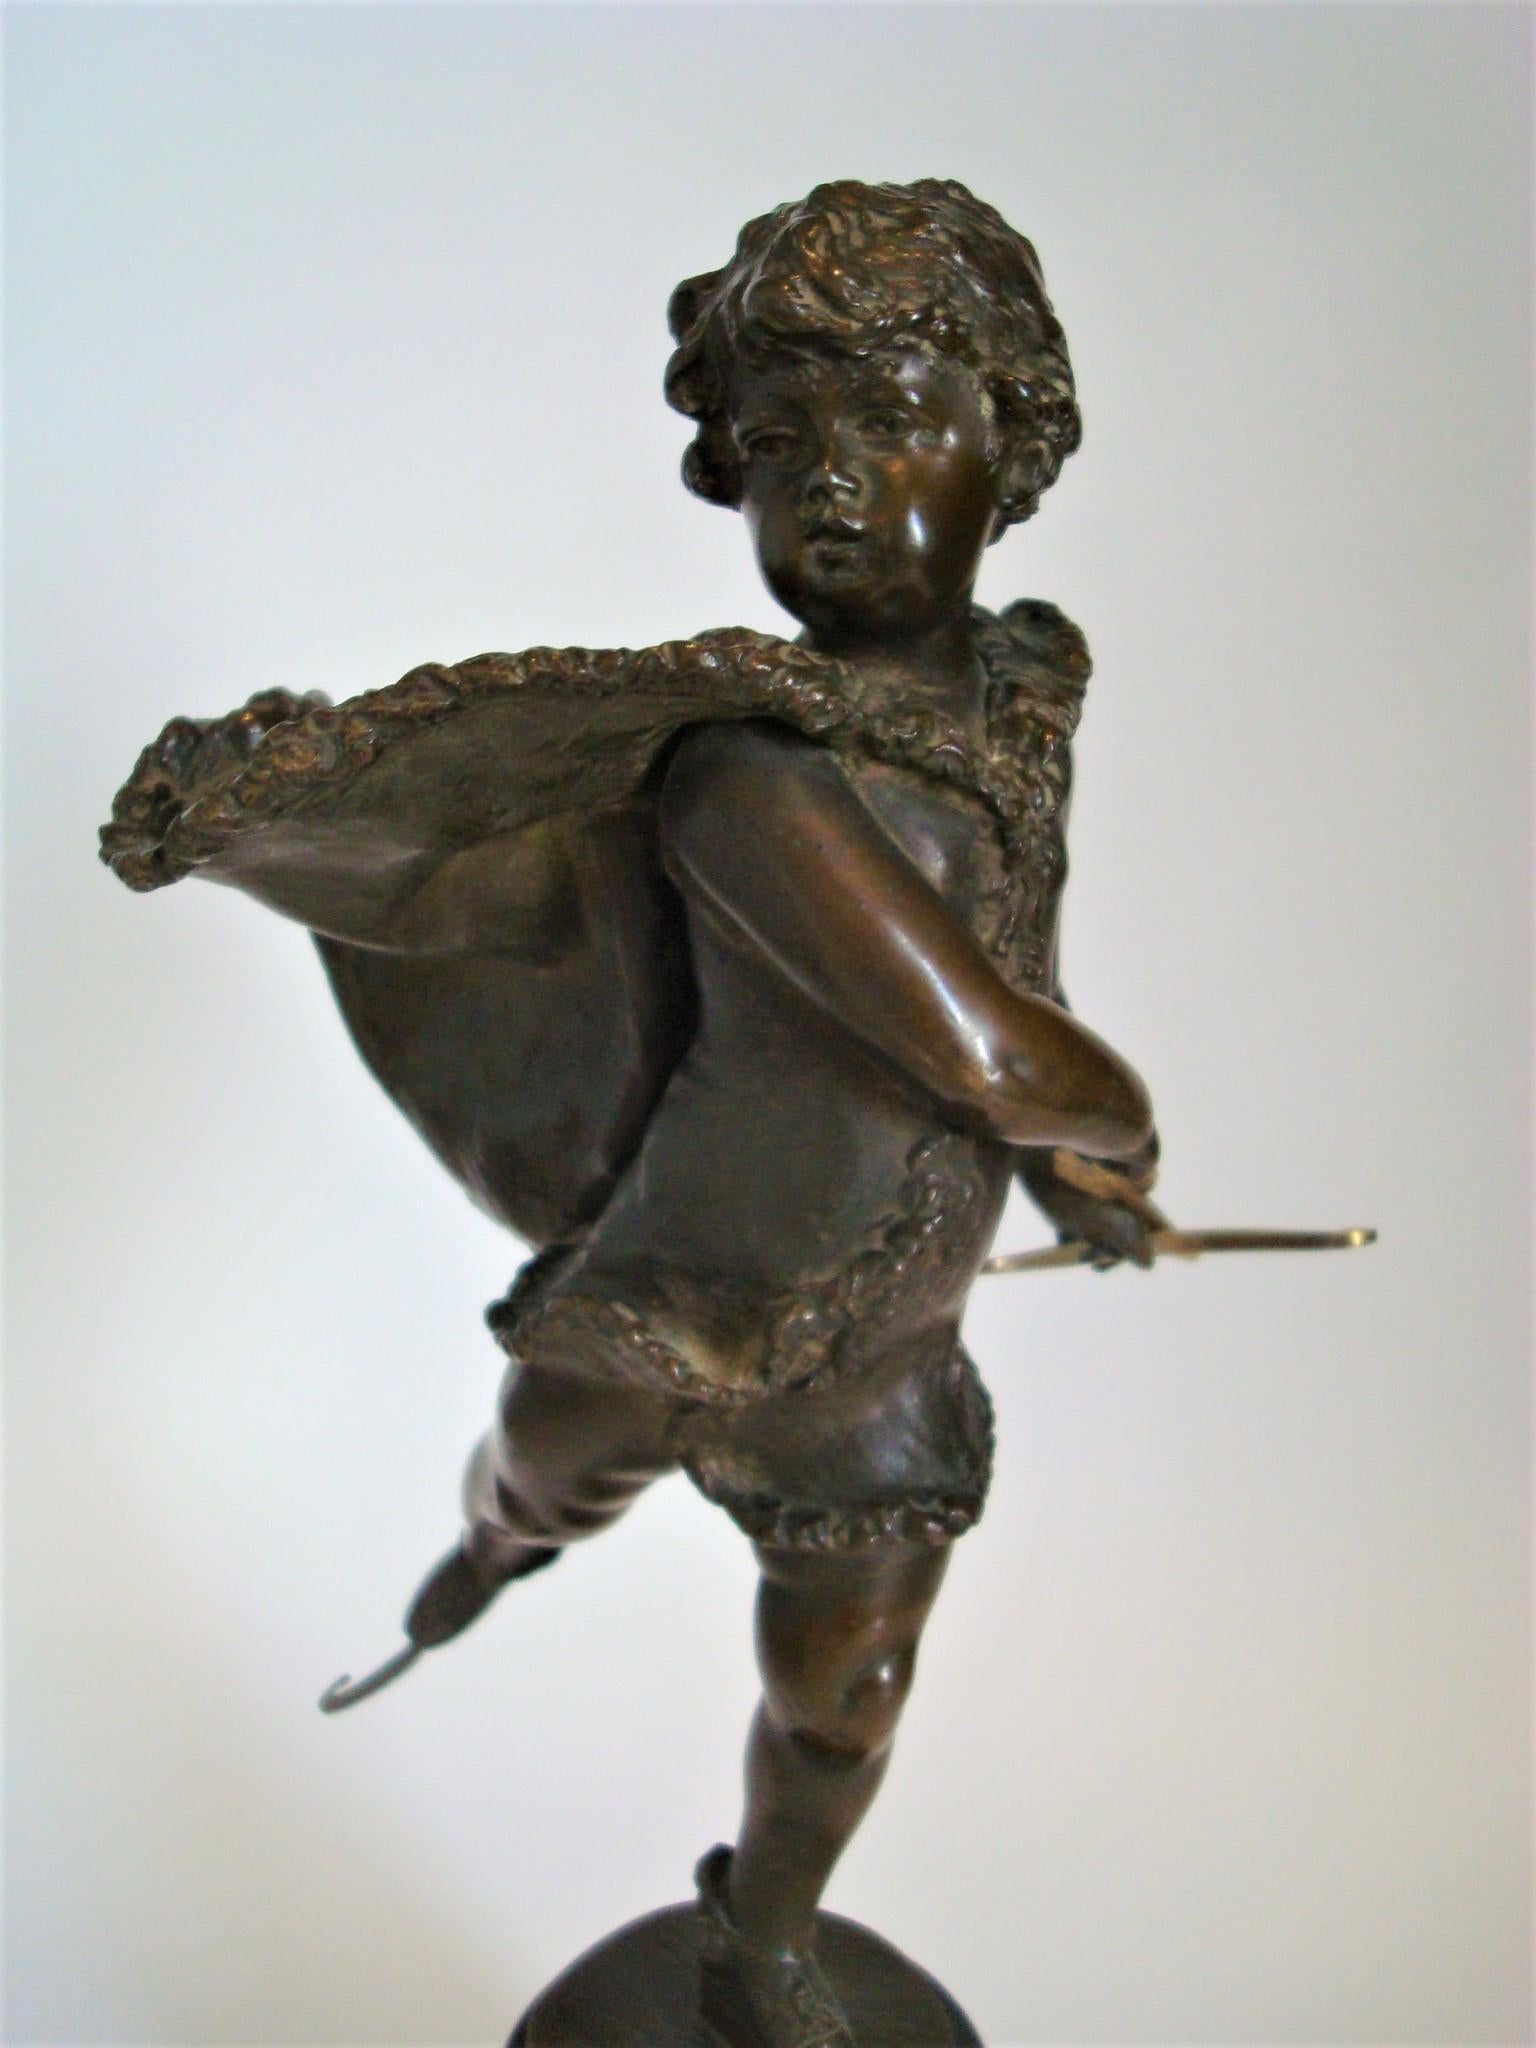 Bronze depicting a young boy (cupid) ice skating, by Franz Iffland (Berlin 1862-1935). A boy in fur-trimmed cape, holds a cupid-like feathered arrow with bow. Iffland was a member of the Berliner Bildhauerschule, was active 1885-1915. He became most